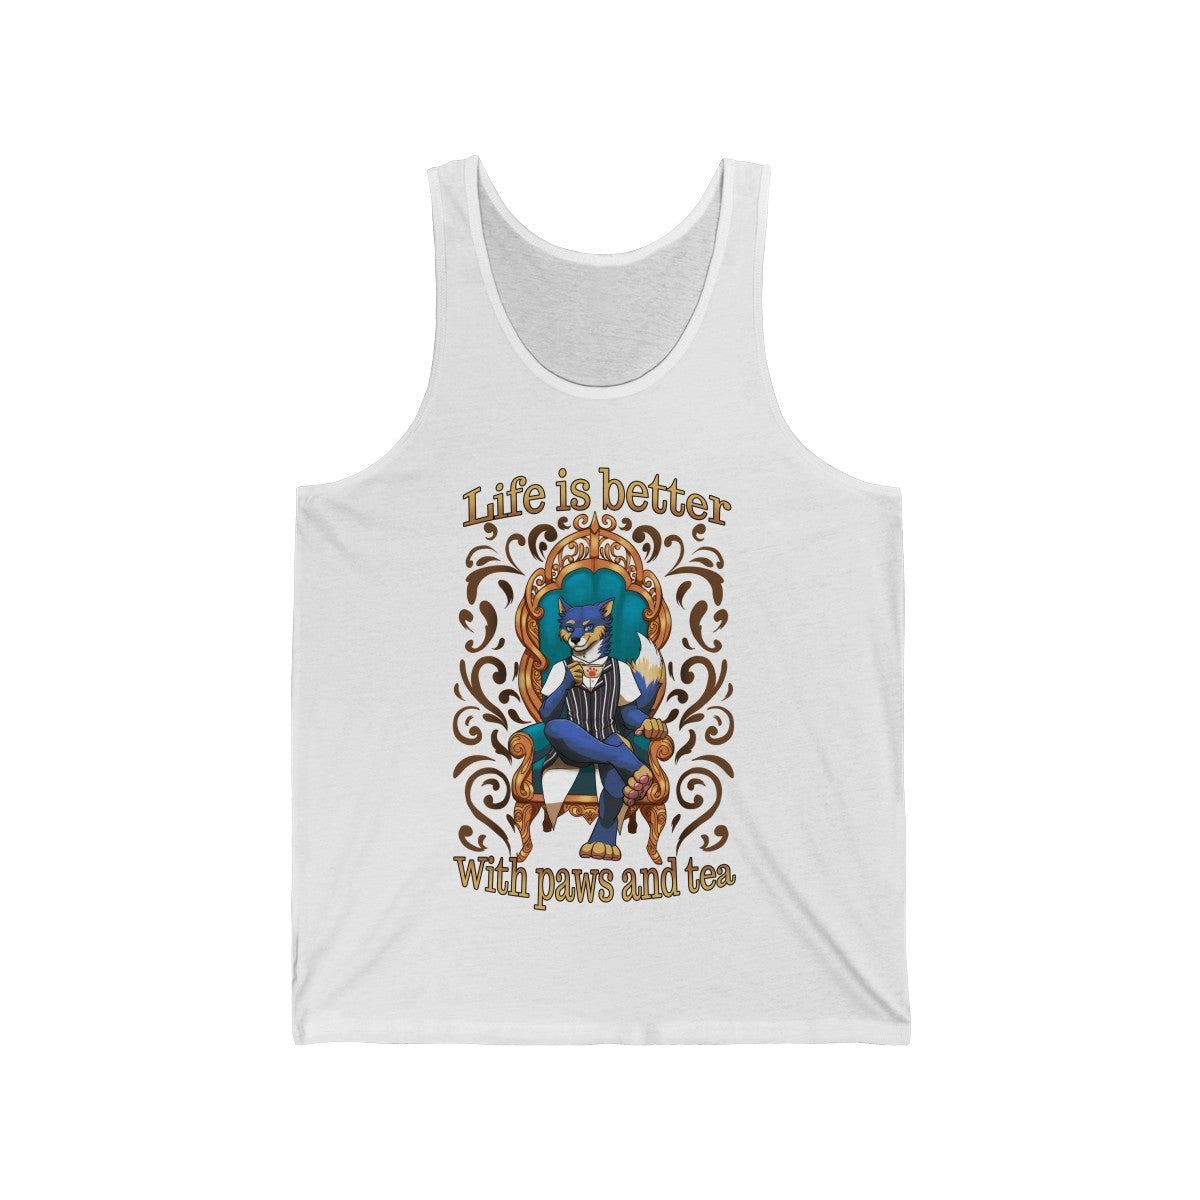 Life is better with Paws and Tea - Tank Top Tank Top Artemis Wishfoot White XS 